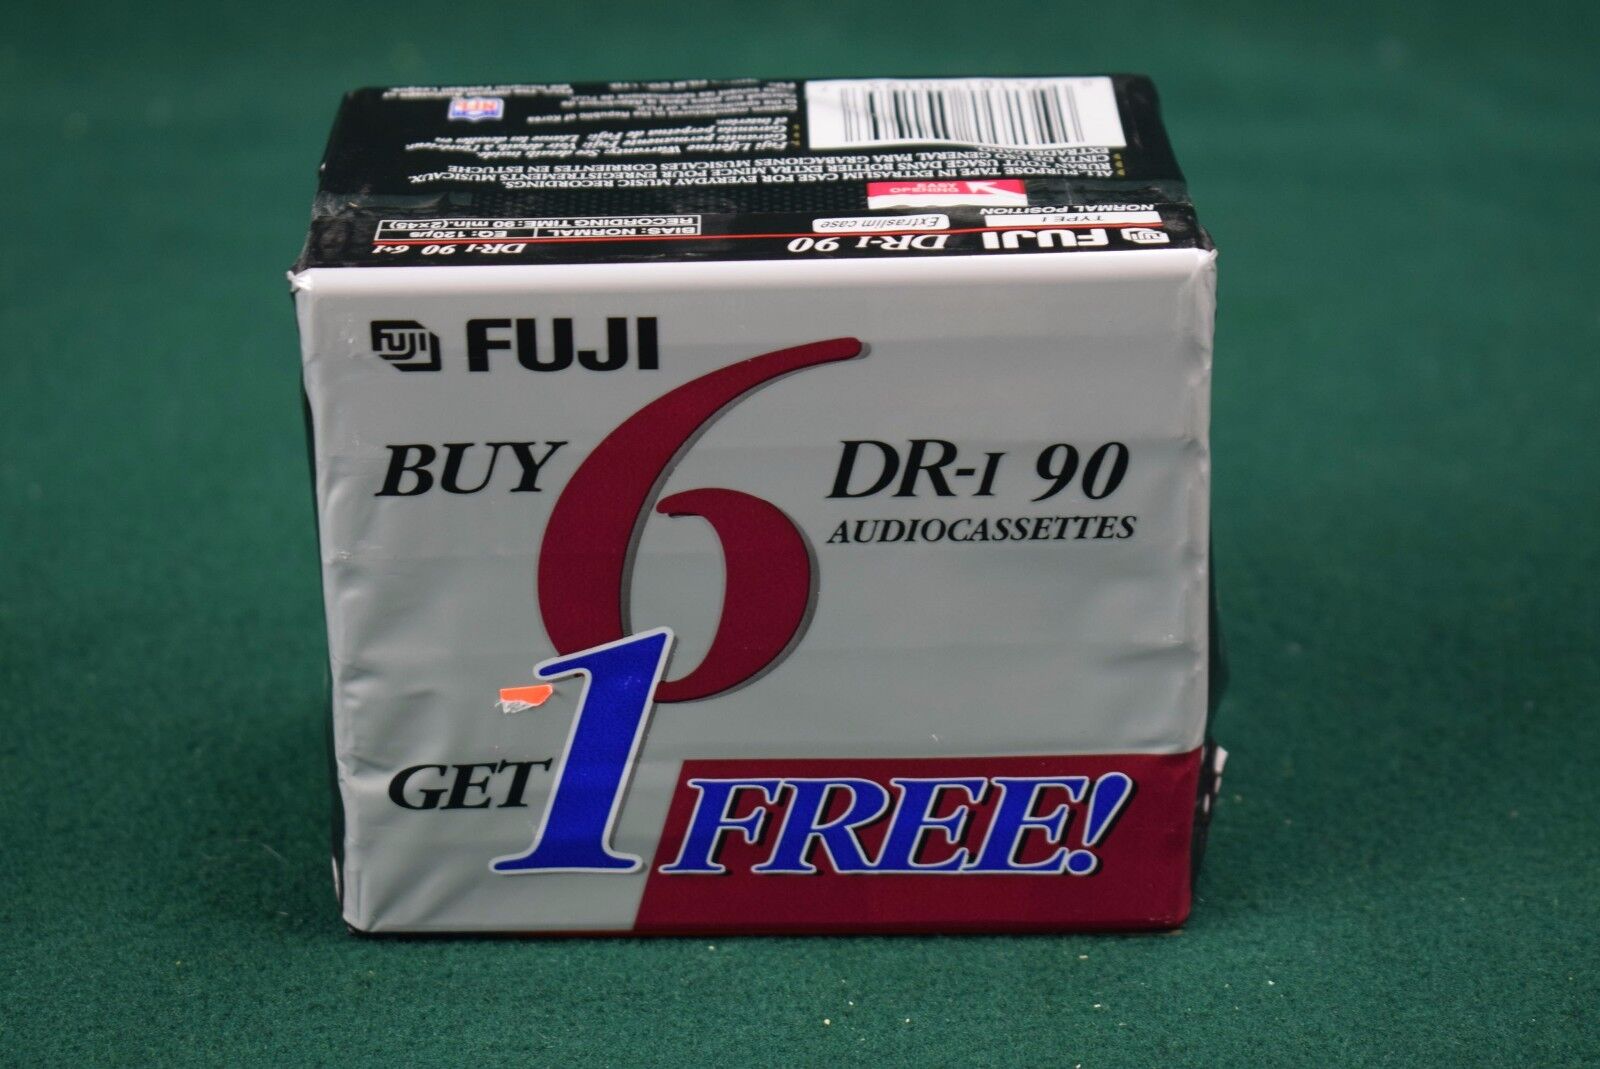 Lot of 7 Fuji DR-I 90 Type I normal bias cassette tapes - new and sealed